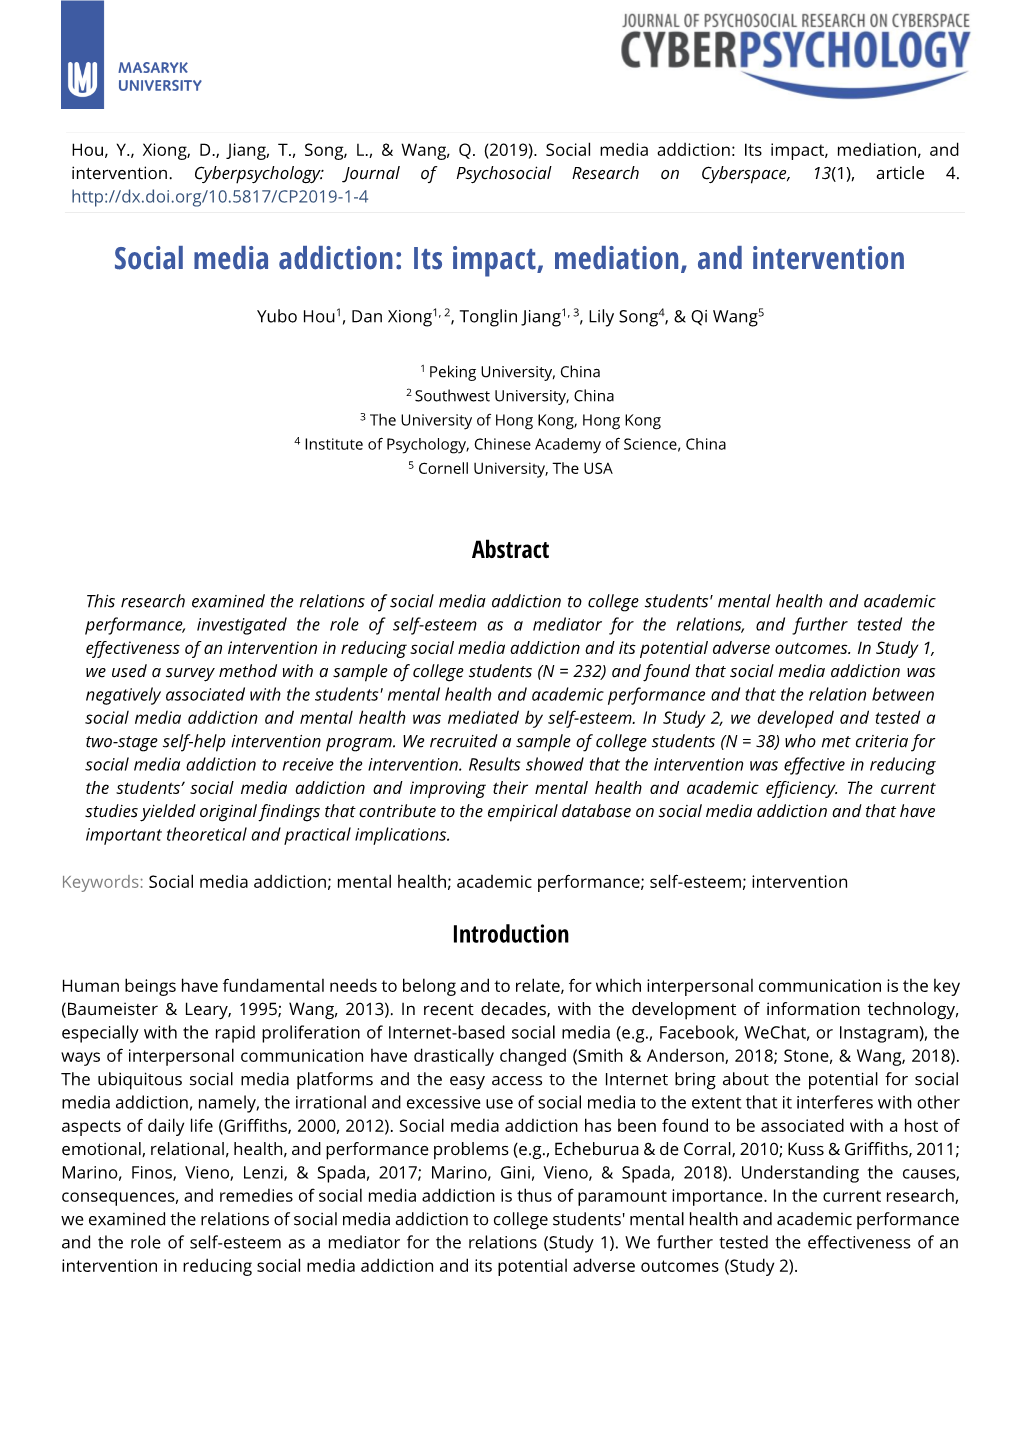 Social Media Addiction: Its Impact, Mediation, and Intervention